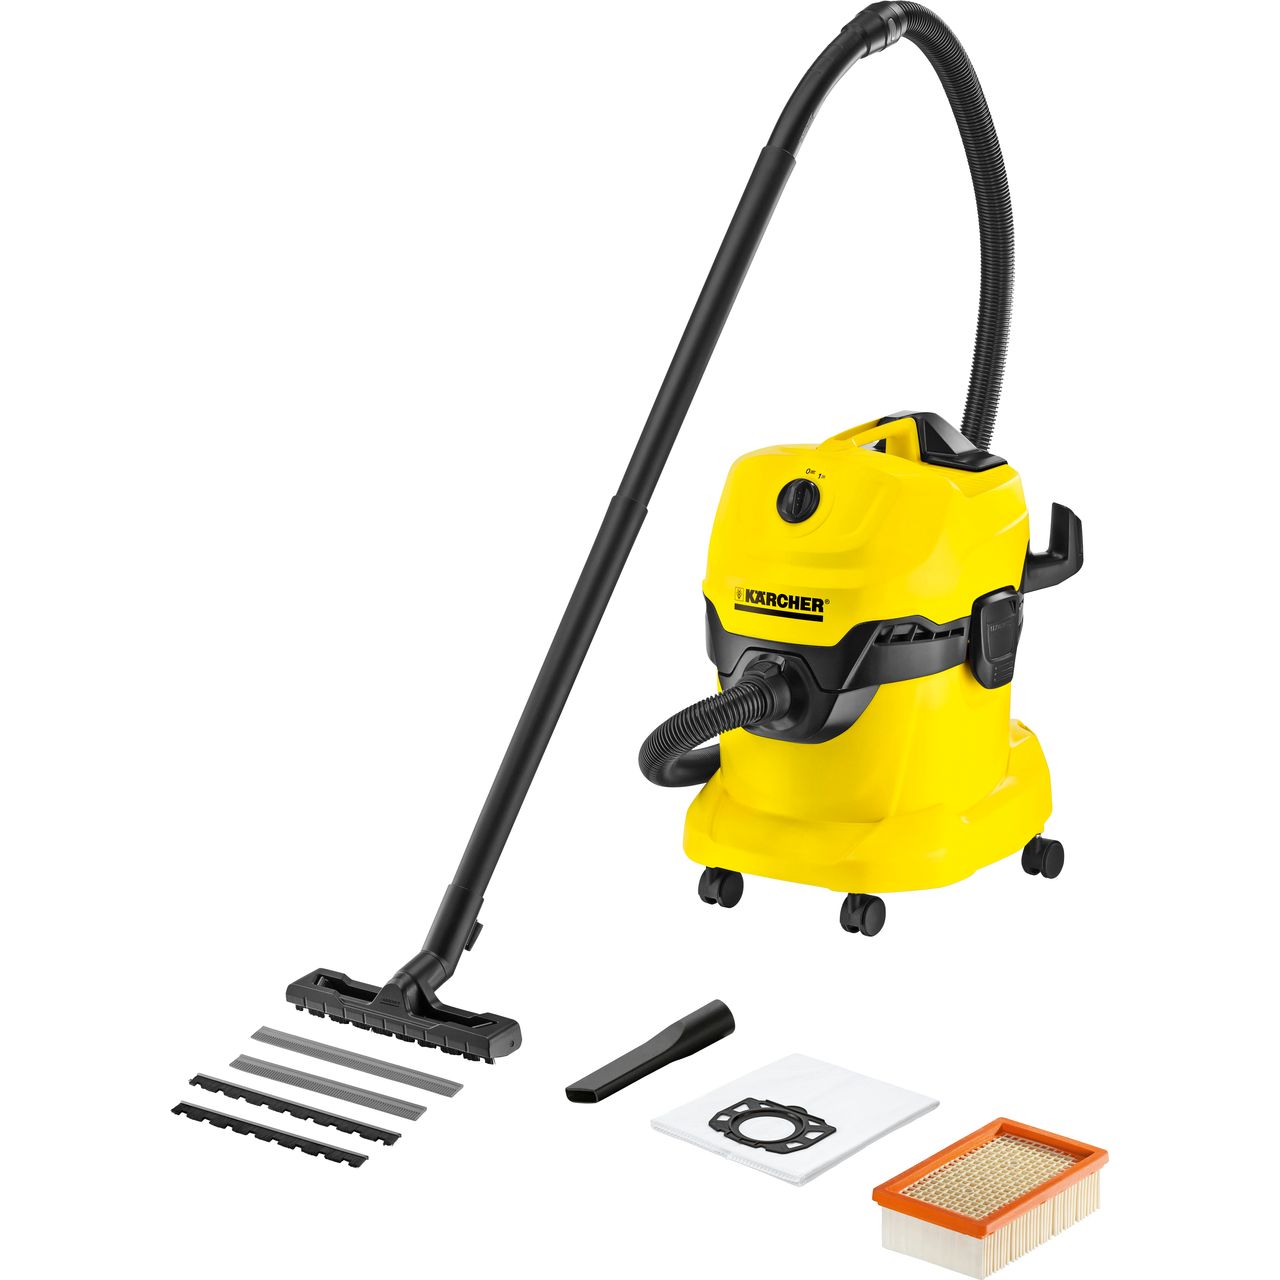 Karcher WD 4 Wet & Dry Cleaner Review